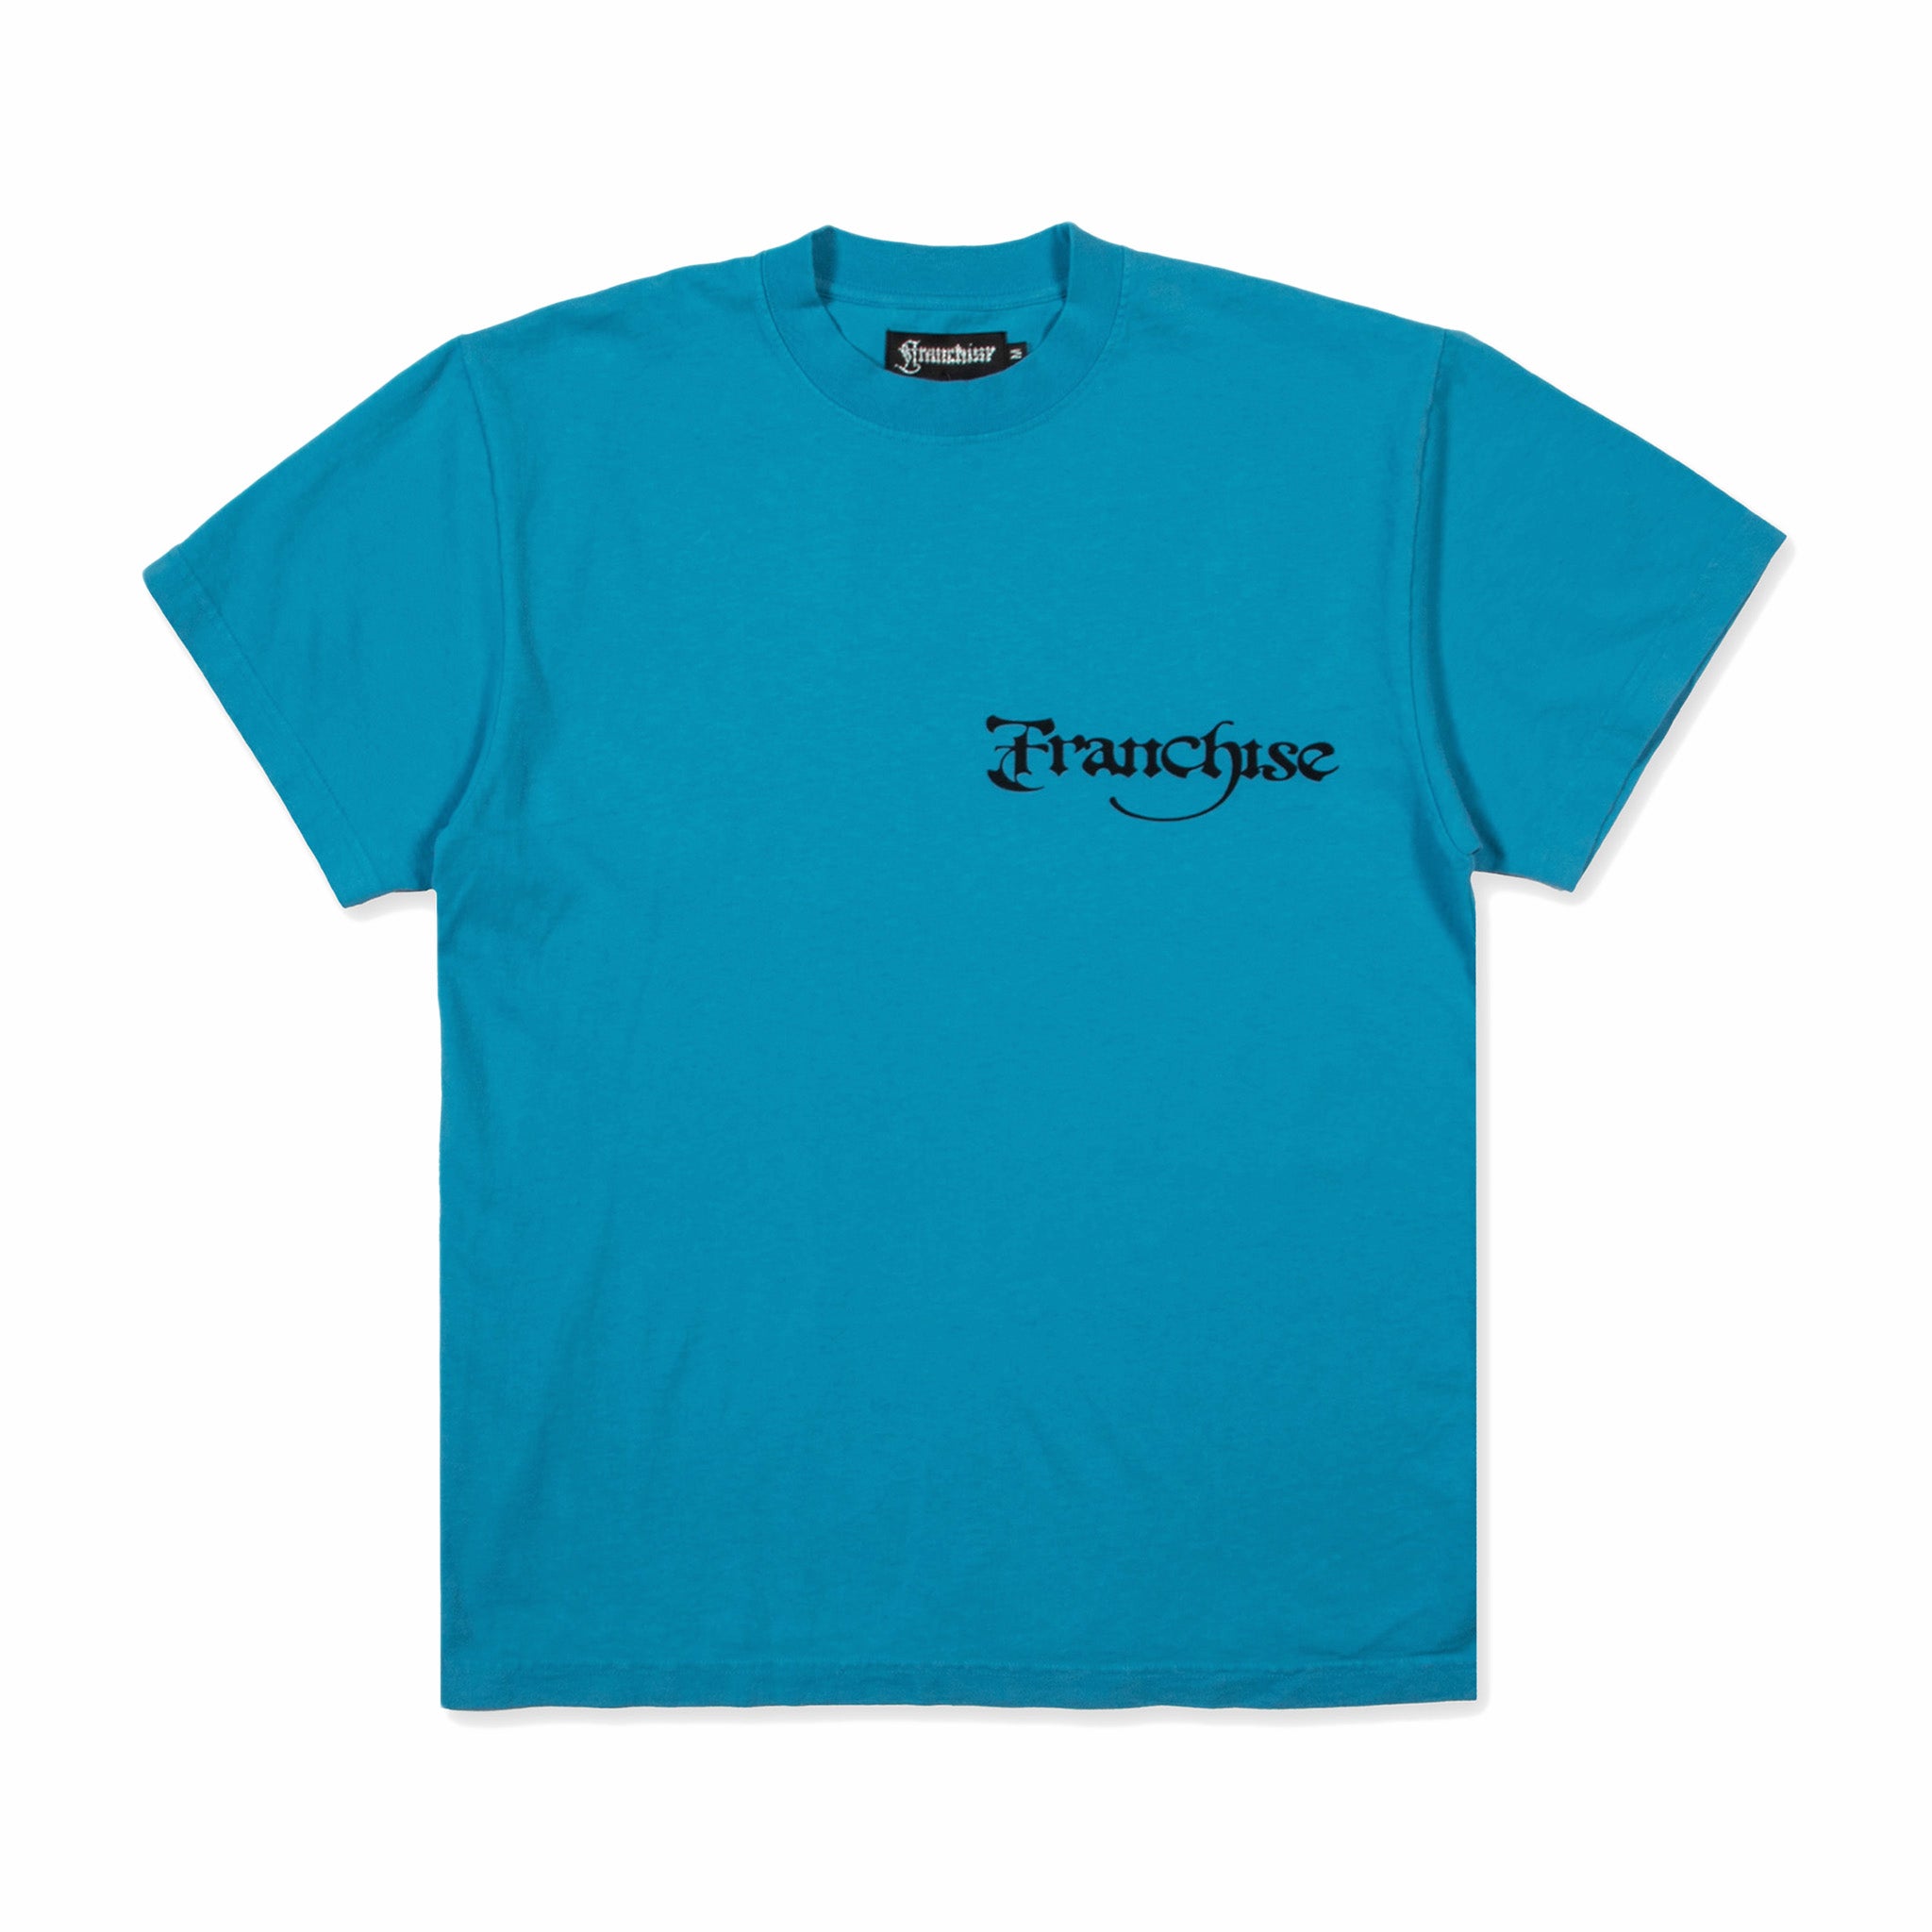 Franchise Back2Back2TheFuture Tee (Faded Blue) - August Shop